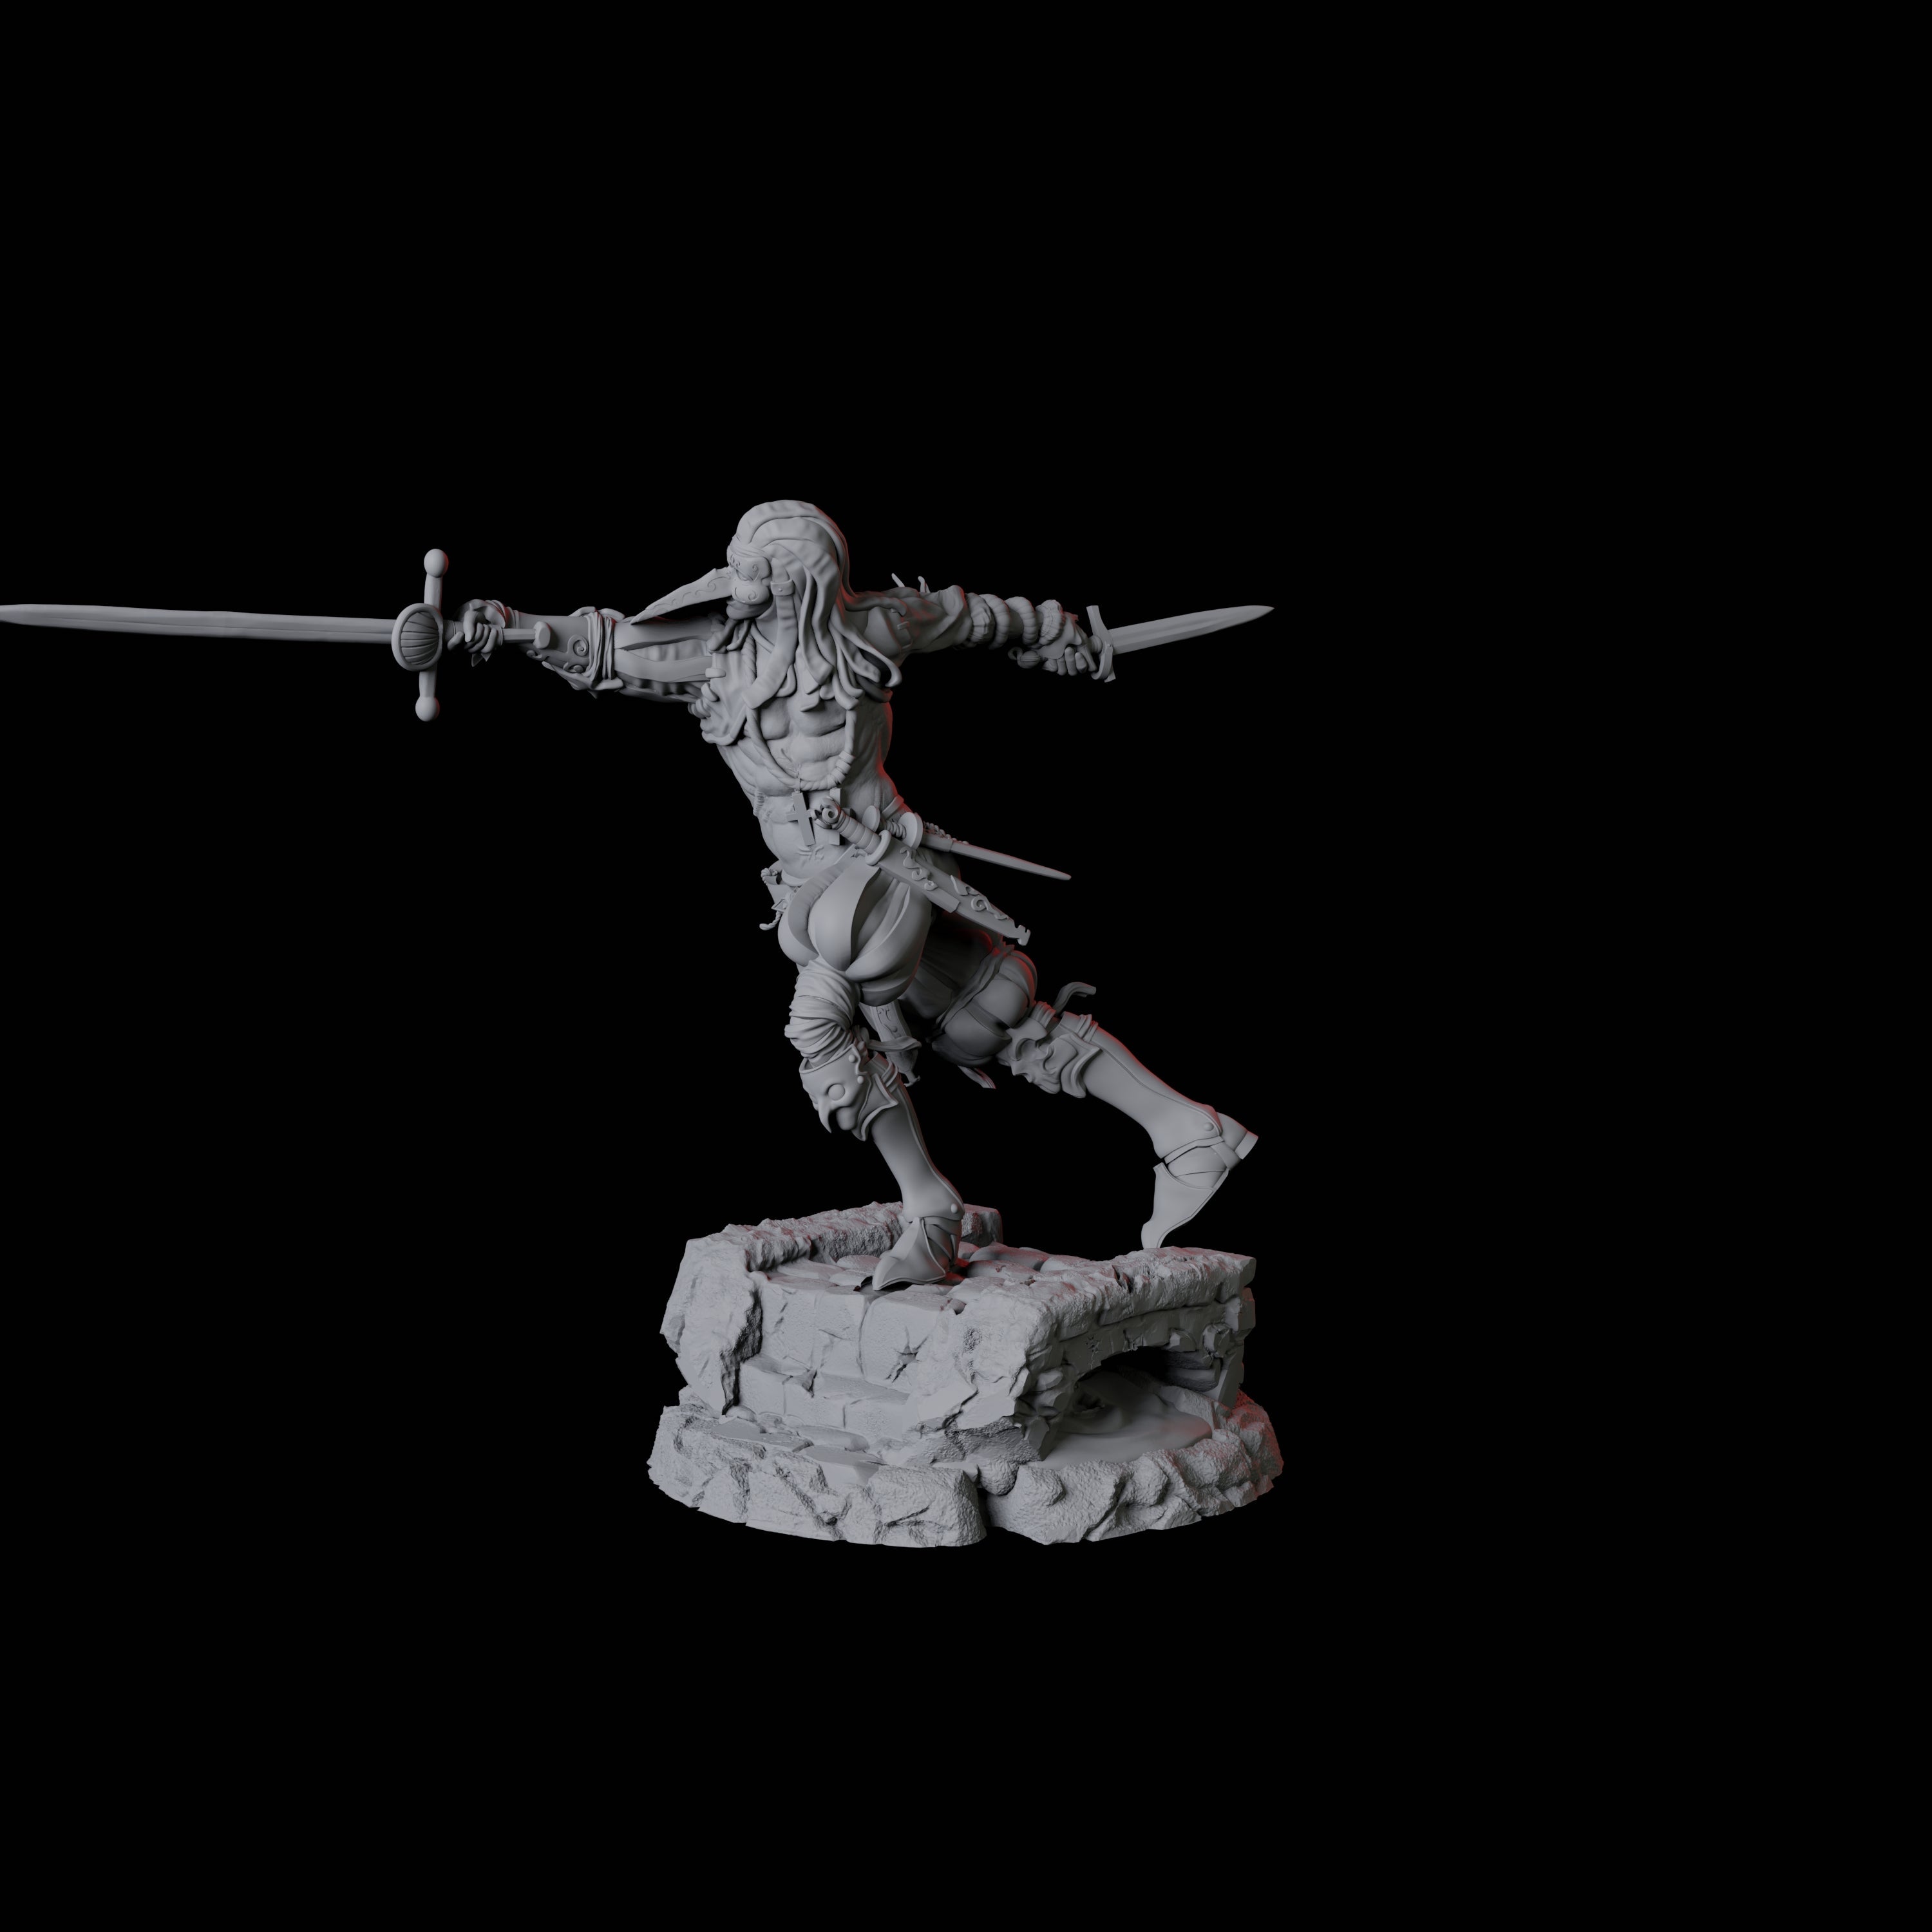 Masked Swordsman C Miniature for Dungeons and Dragons, Pathfinder or other TTRPGs